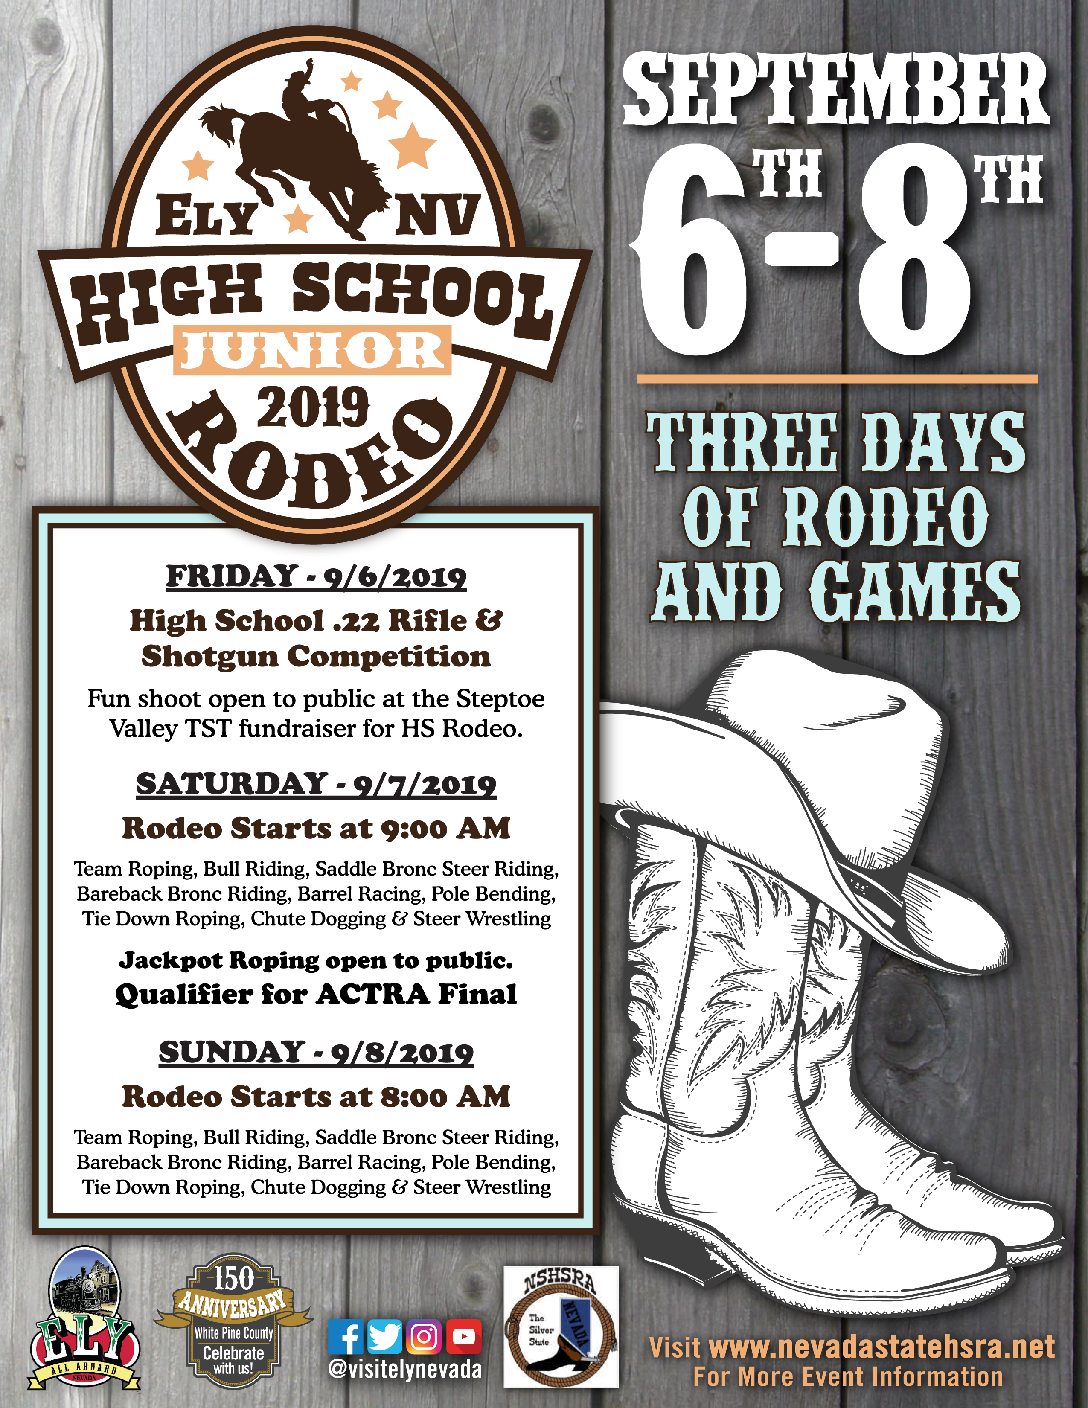 High School/Junior Rodeo - Welcome To Ely